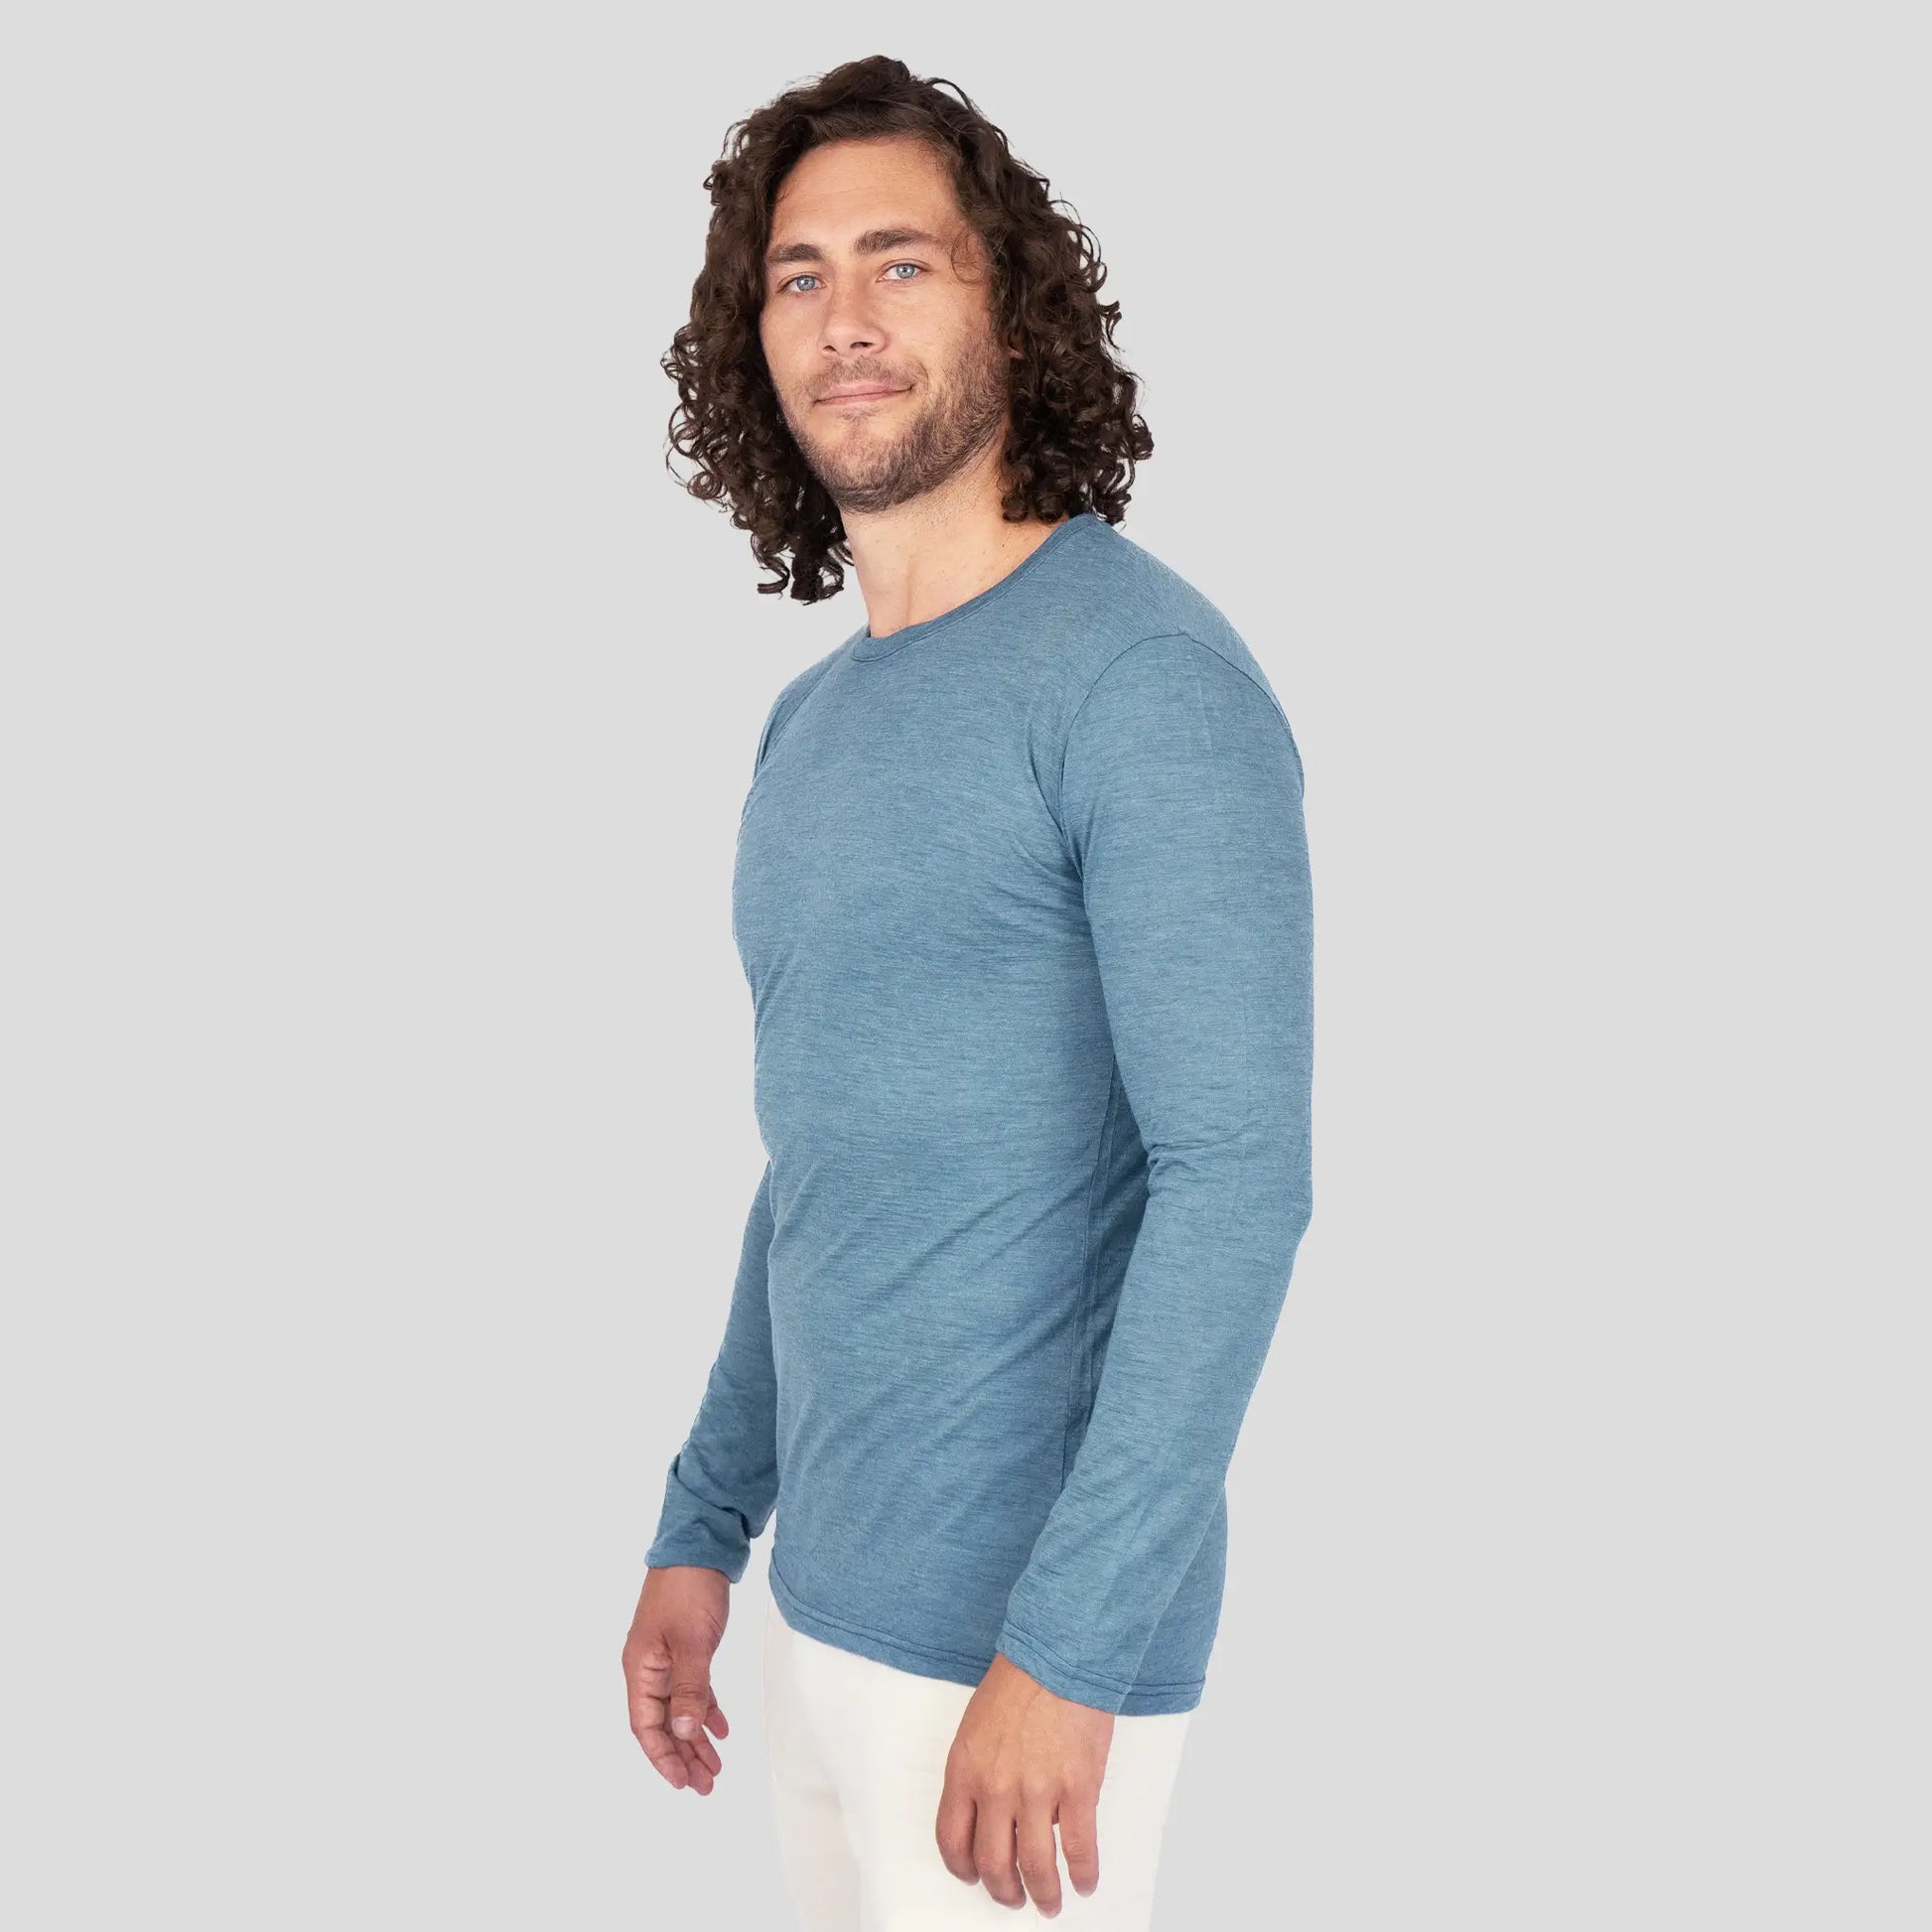 Men's Alpaca Wool Long Sleeve Base Layer: 160 Ultralight color Natural Turquoise